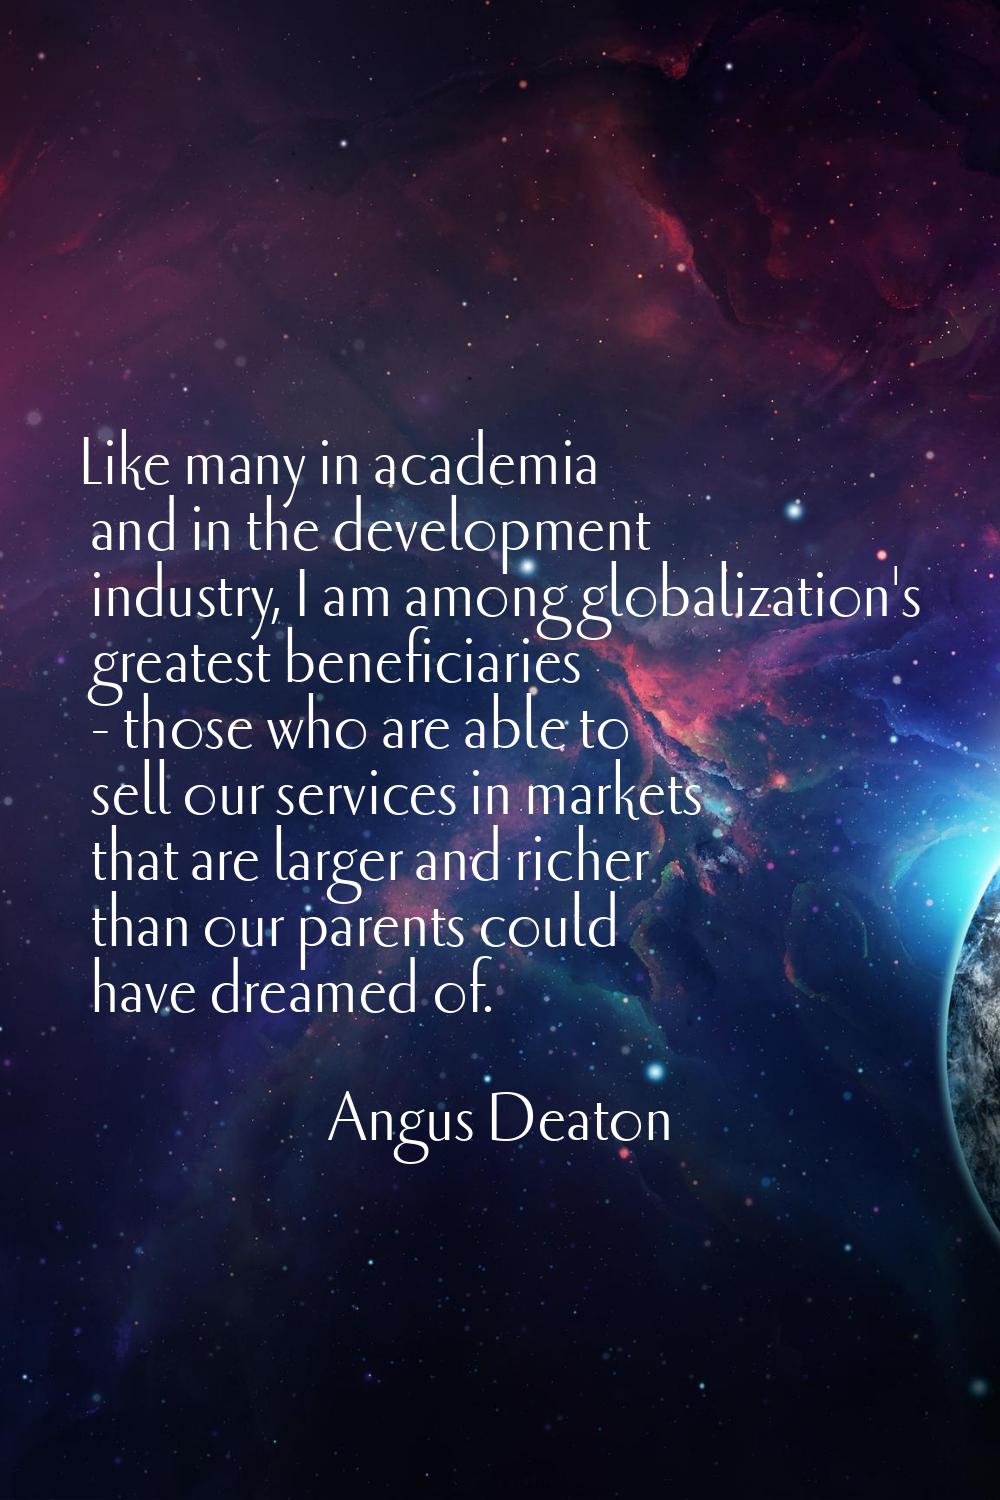 Like many in academia and in the development industry, I am among globalization's greatest benefici